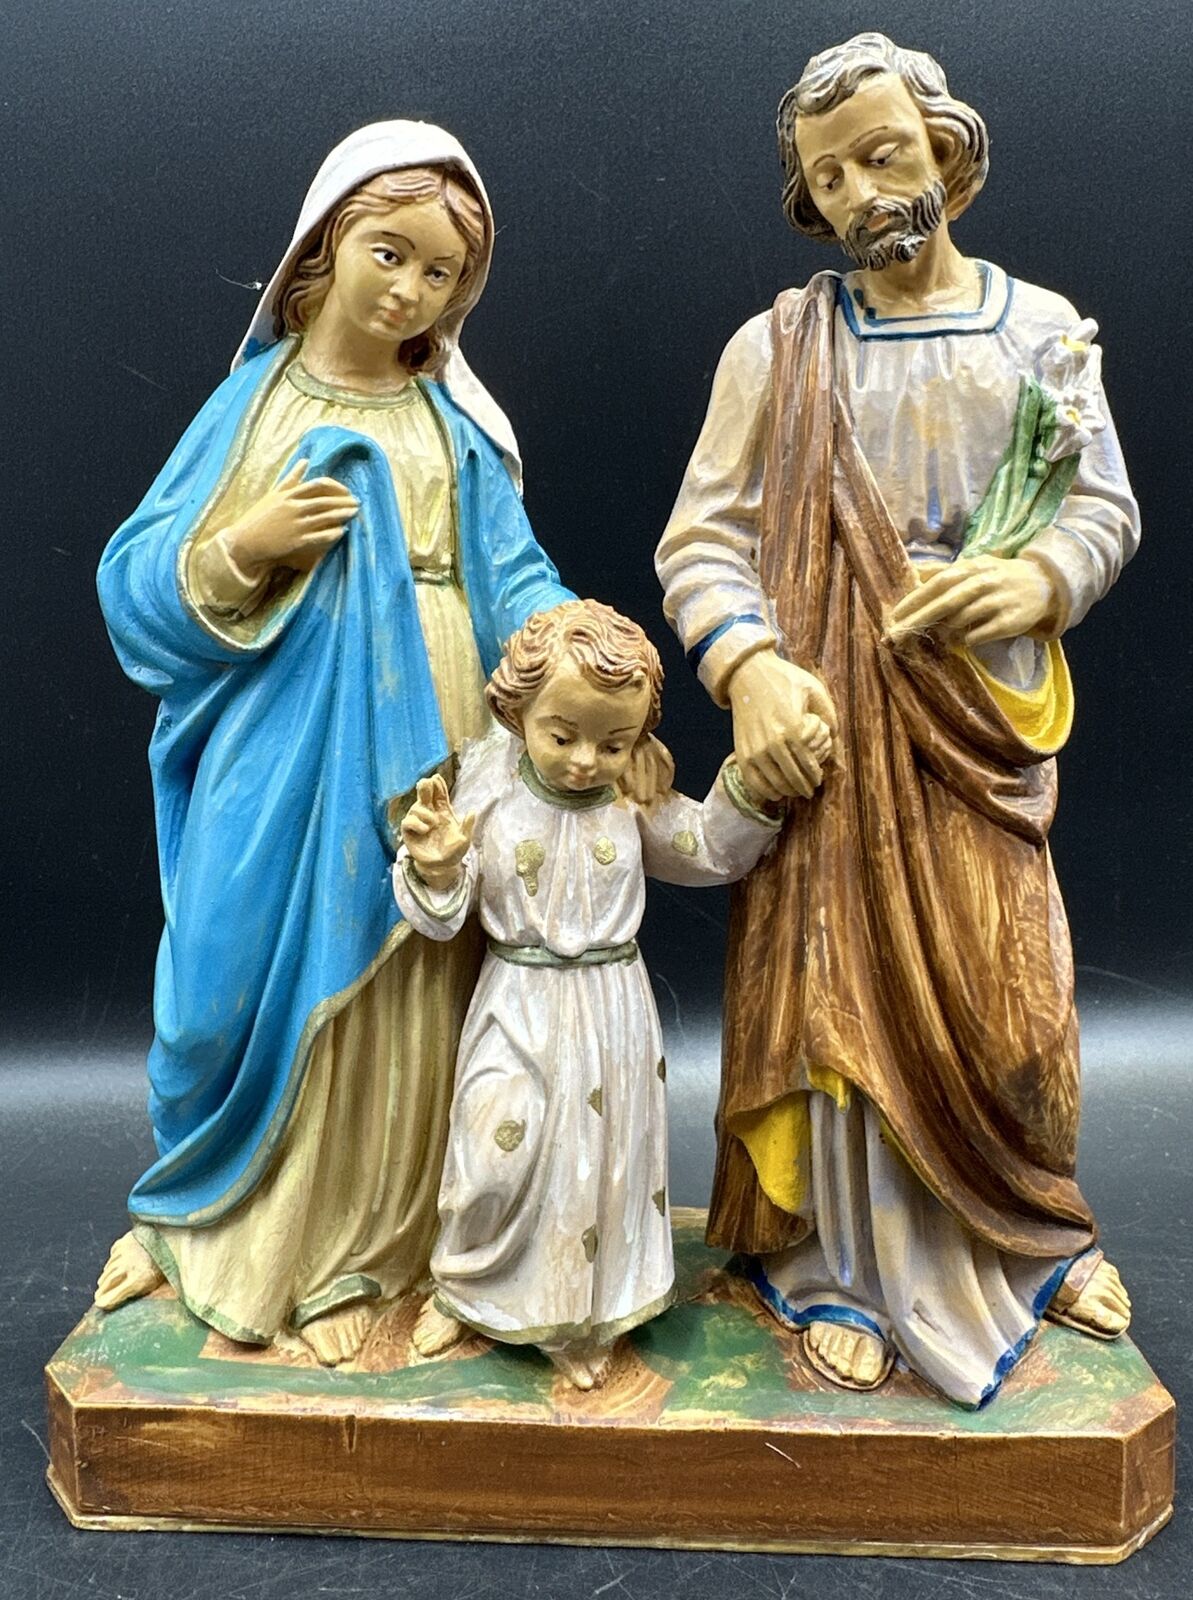 Fontanini Holy Family Nativity 22cm Euromarchi Resin 7\' Wood Effect Italy